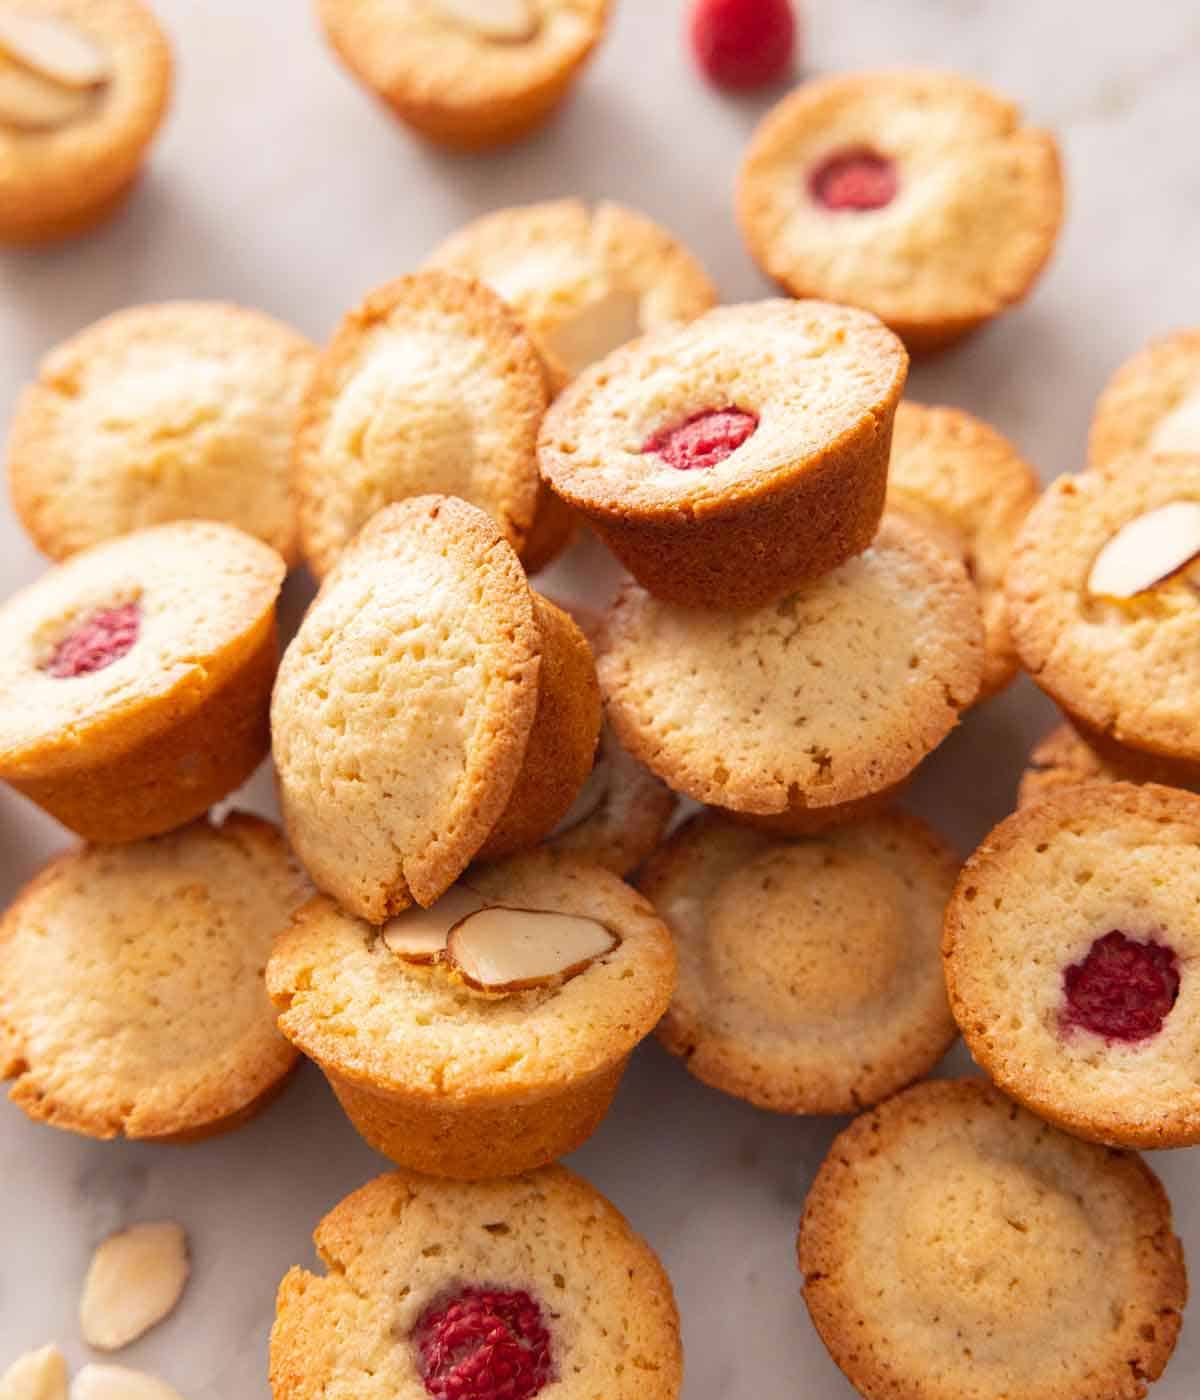 Multiple financiers in a pile, some plain, some with a raspberry on top, and some with sliced almonds on top.